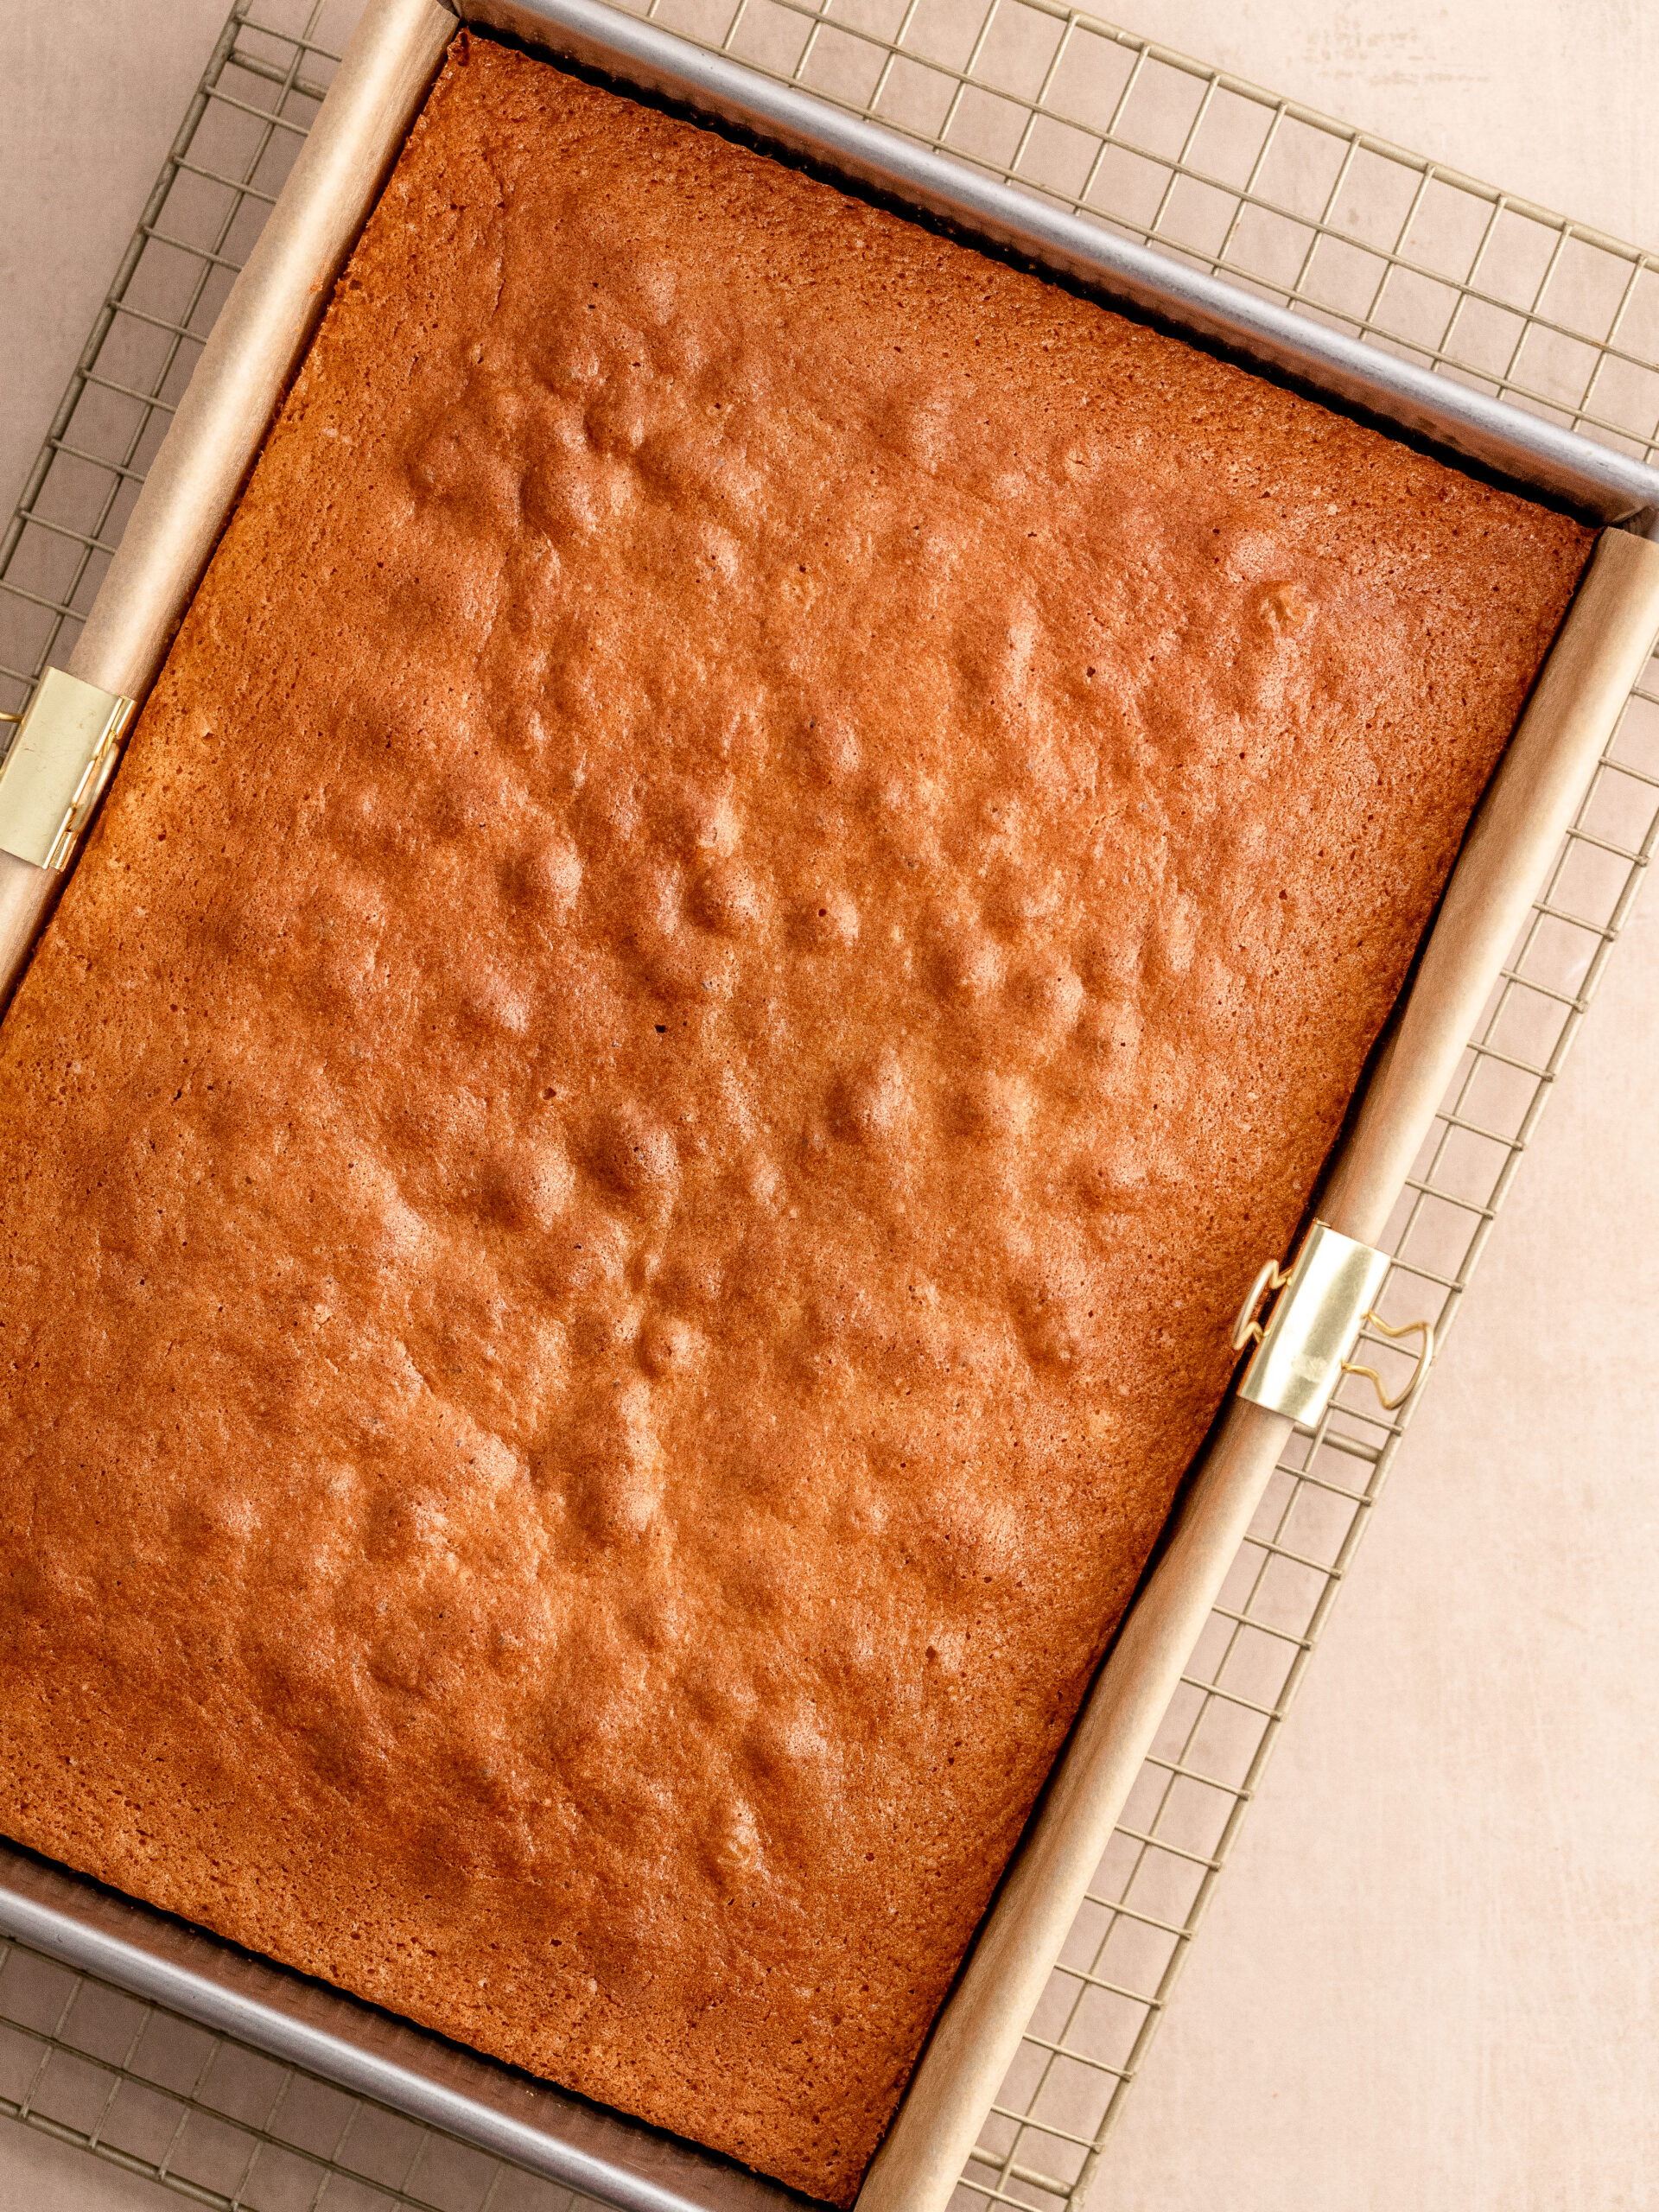 Step 3: Let the baked cake cool down on a cooling rack.